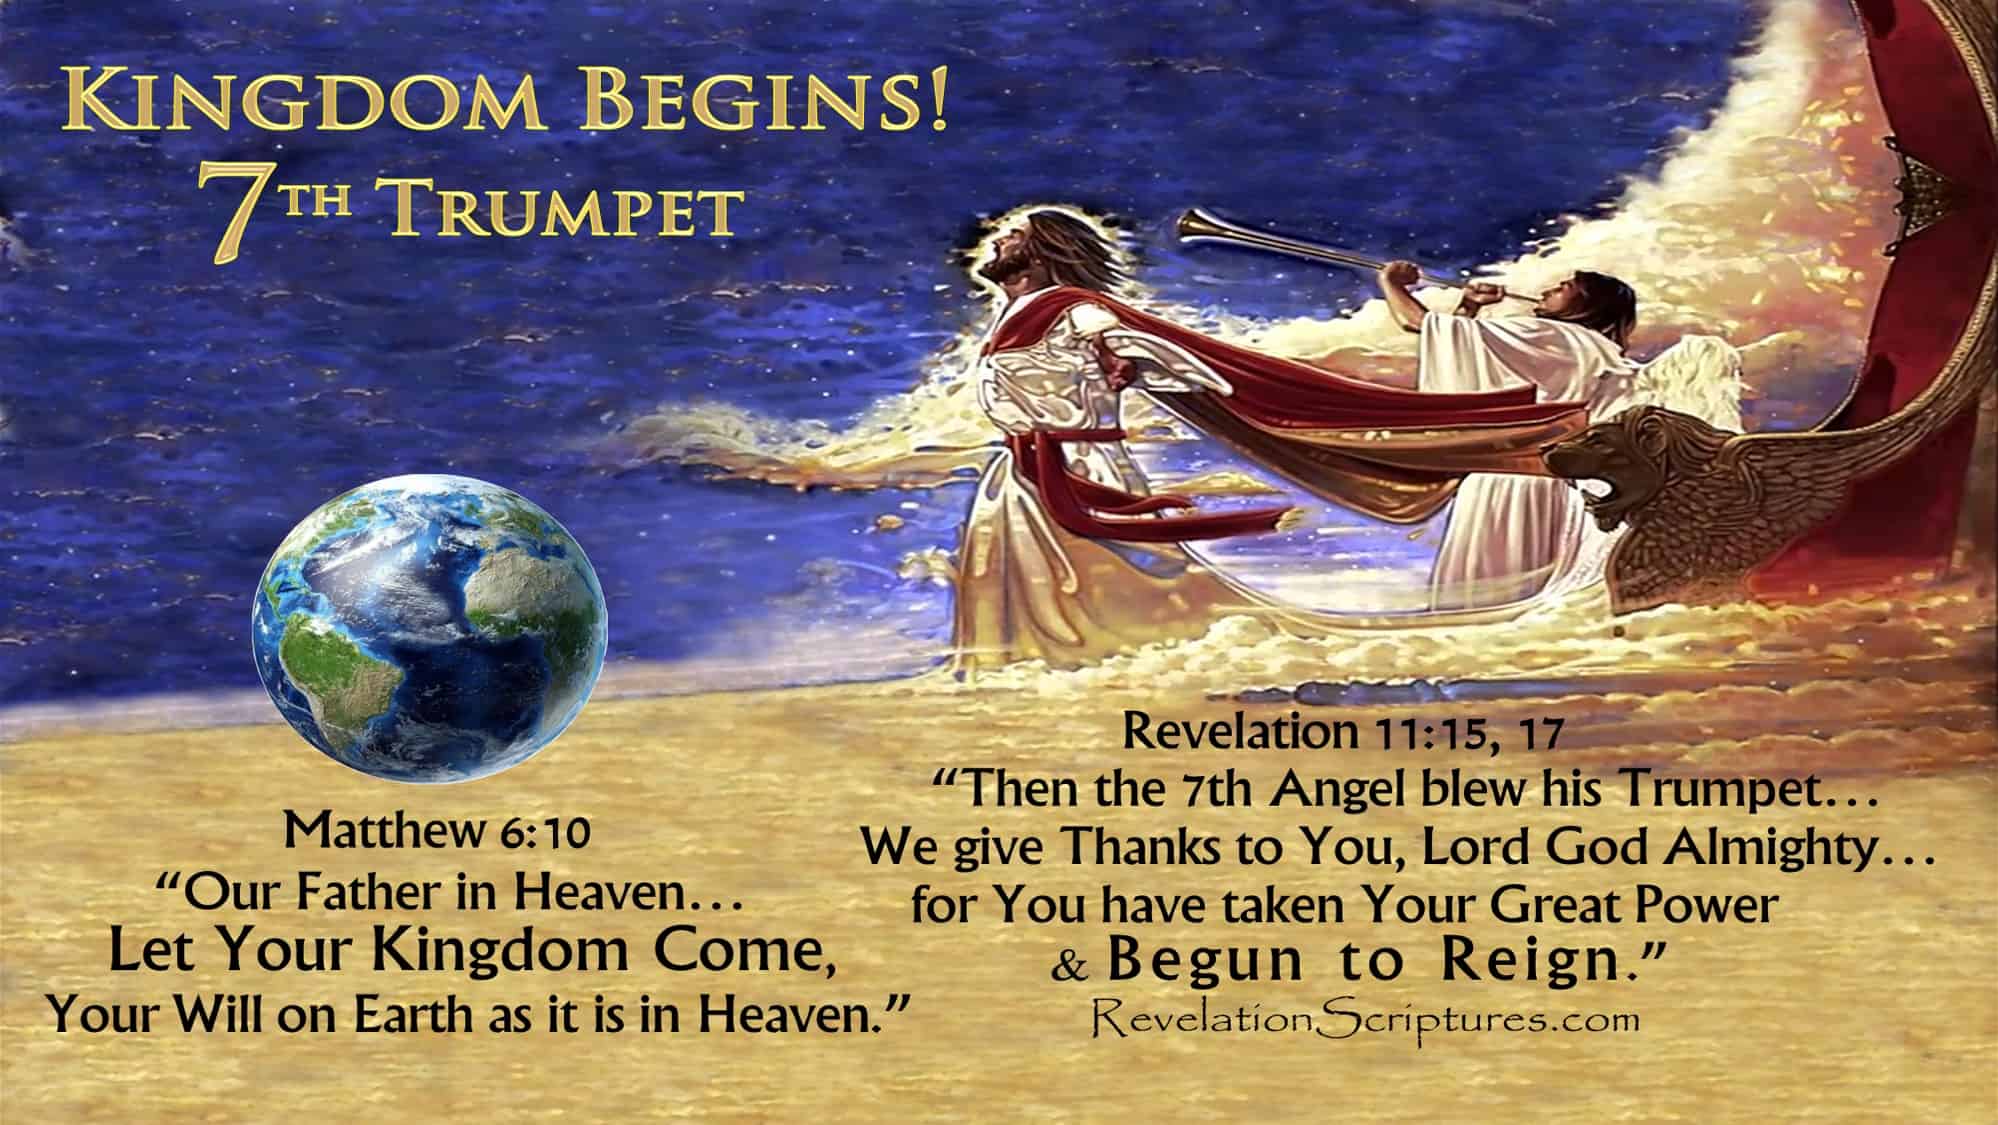 Feast of trumpets,yom teruah,rosh Hashanah,new moon,shofar,Hebrew,Israel,rapture,bible,revelation,Jesus,jubilee,old testament,heaven,day,symbol,jews,church,happy,logo,Israelites,fall,celebration,explained,sabbath,rest,lord,blast,shout,shouting,blowing trumpets,Leviticus 23,Fall Feast,appointed,time,moed,alarm,messianic,day of shouting,7 Trumpets,7 Trumpets in Revelation,7 Trumpets of Revelation,Seven Trumpets,Seven Trumpets Revelation,7 Angels given 7 Trumpets,7 Angels blow 7 Trumpets,Natzarim,2nd Coming,Second Coming,Numbers 29,Fulfillment in Revelation,Fulfillment,Feast of Trumpets Revelation,Yom teruah Revelation,Future Fulfillment in Revelation,Book of Revelation,Apocalypse,Seventh Trumpet,seventh Trumpet of revelation,God’s Wrath,end world,apocalypse,7th Trumpet,3rd woe,Trumpet 7,Third Woe,God's Temple,Heaven,Ark,Ark of the Covenant,Earthquake,Great Hail,Hail,Heavy Hail,Begun to Reign,Nations Angry,Wrath,Wrath has come,Reward,Judg Dead,time to reward,time to judge the dead,Book of Revelation,Revelation Chapter 11,Apocalypse,scriptural interpretation,biblical interpretation,food in due season,kingdom of world,kingdom of Christ,kingdom,birth of Kingdom,start of kingdom,destroy those ruining the earth,destroy the destroyers of the earth,7 bowls of Wrath,7 vials of Wrath,day of wrath,day of vengeance,day of the lord,revelation,saints,prophets,great and small,those who fear your name